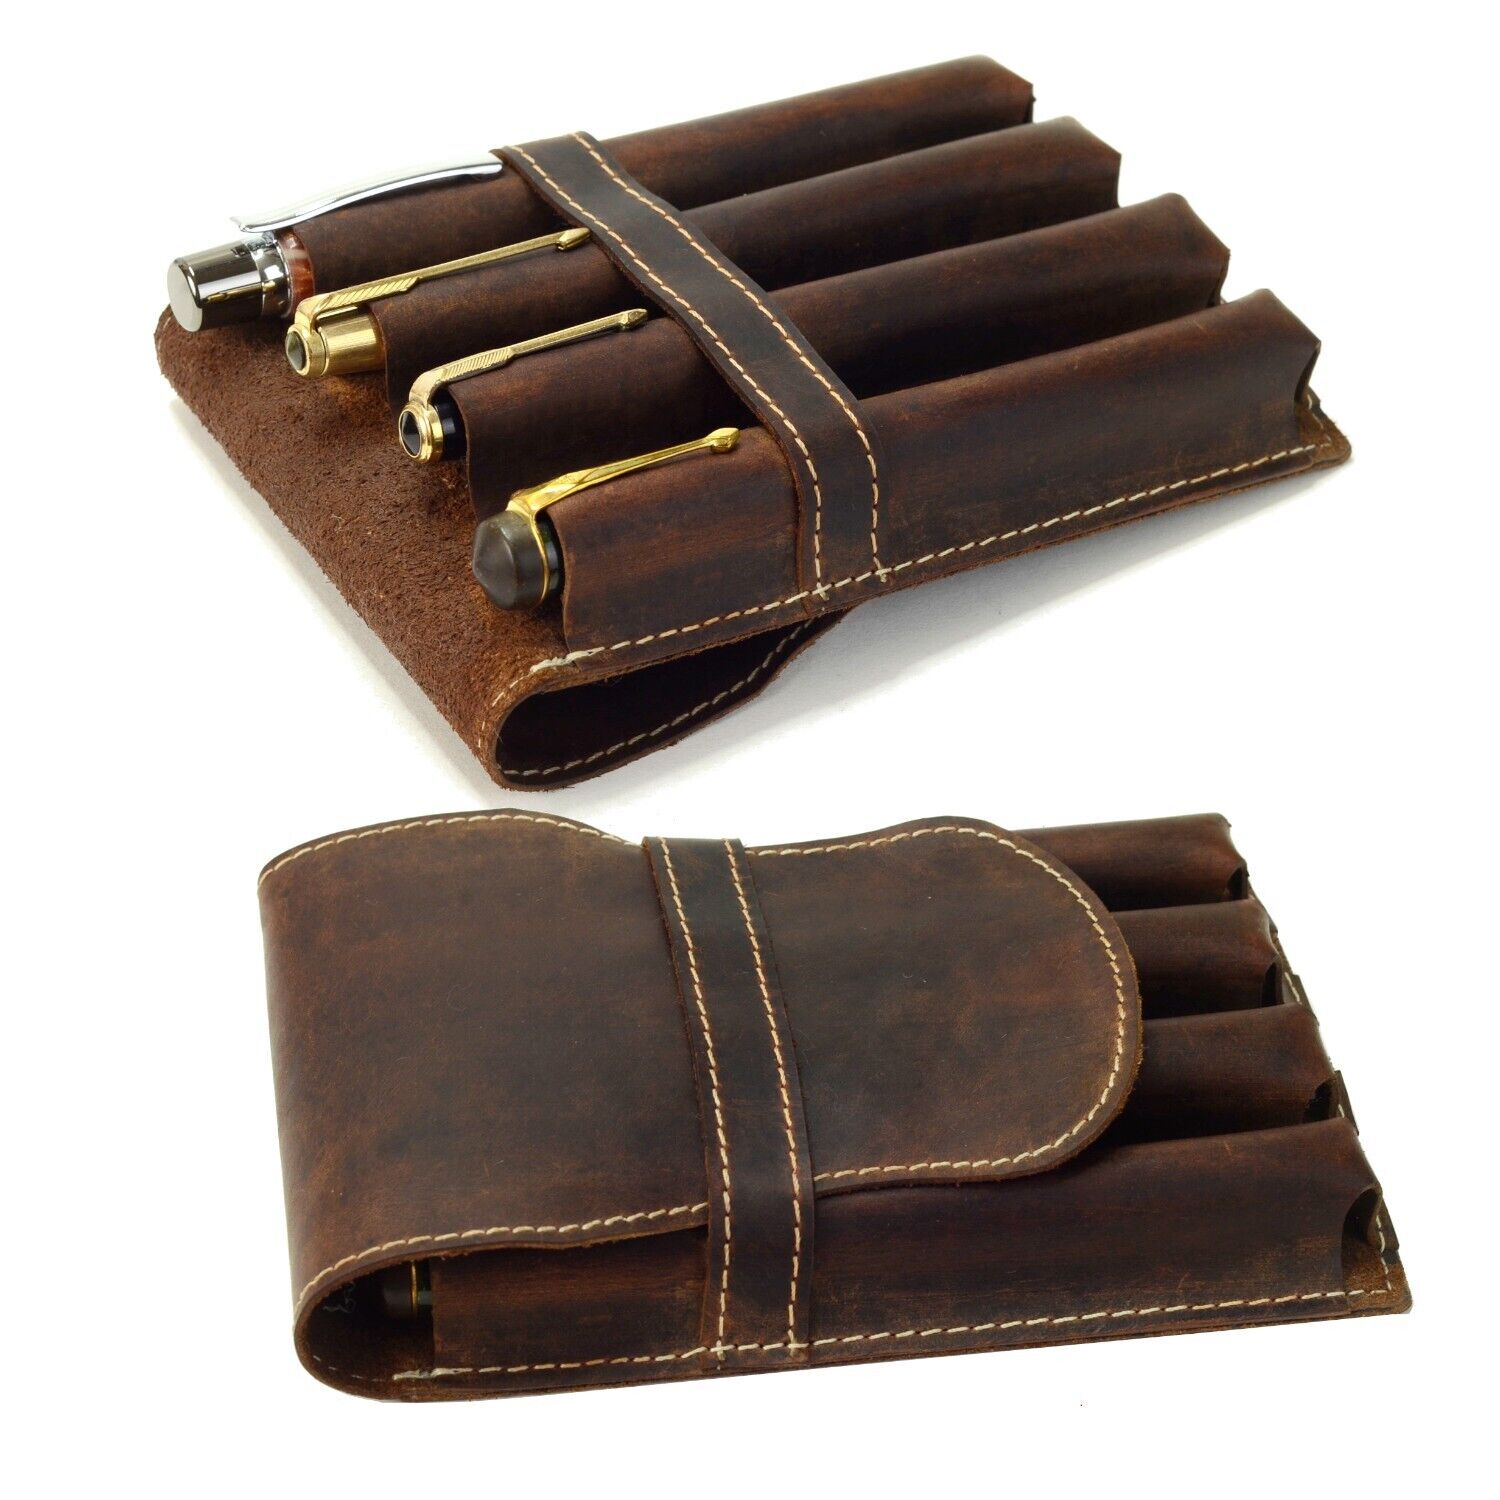 leather Pen pouch case for 4 jumbo pens with vintage style hunter leather